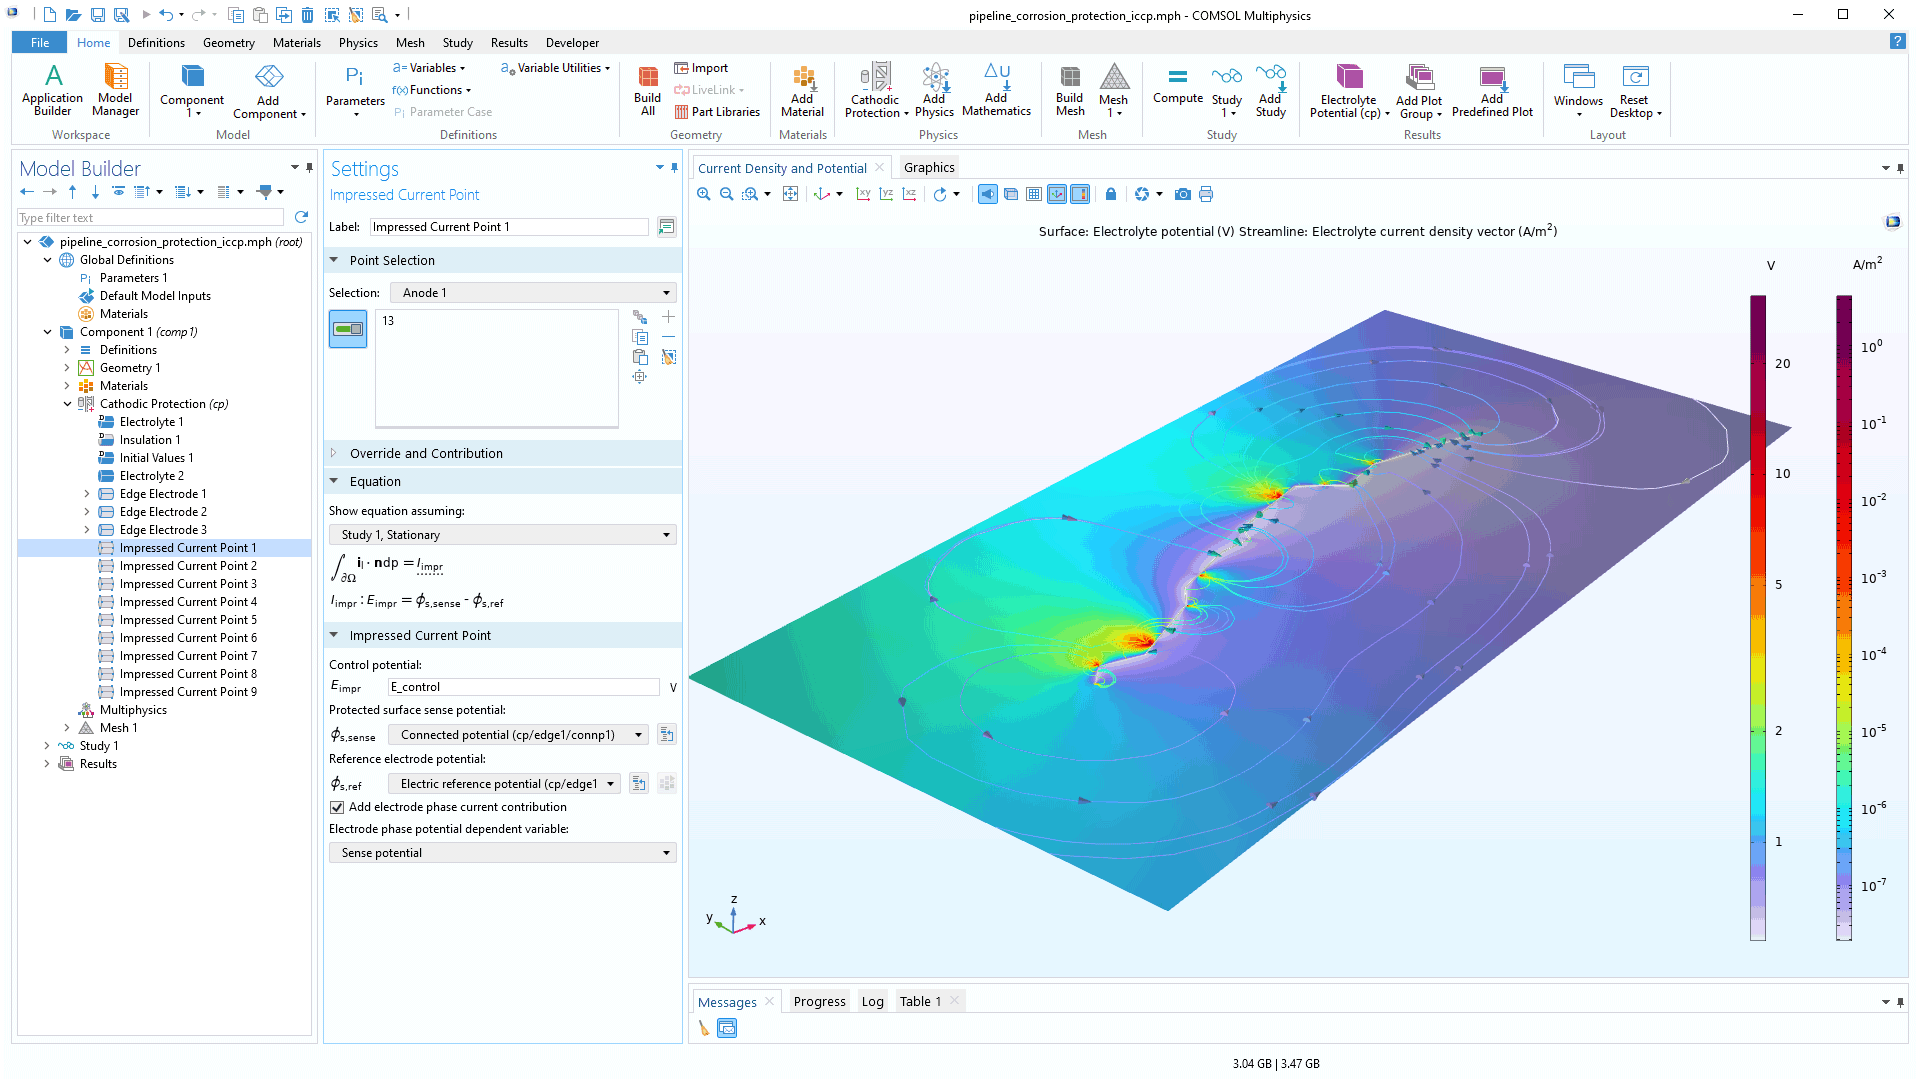 The COMSOL Multiphysics UI showing the Model Builder with an Impressed Current Point node highlighted, the corresponding Settings window, and a corrosion model in the Graphics window.